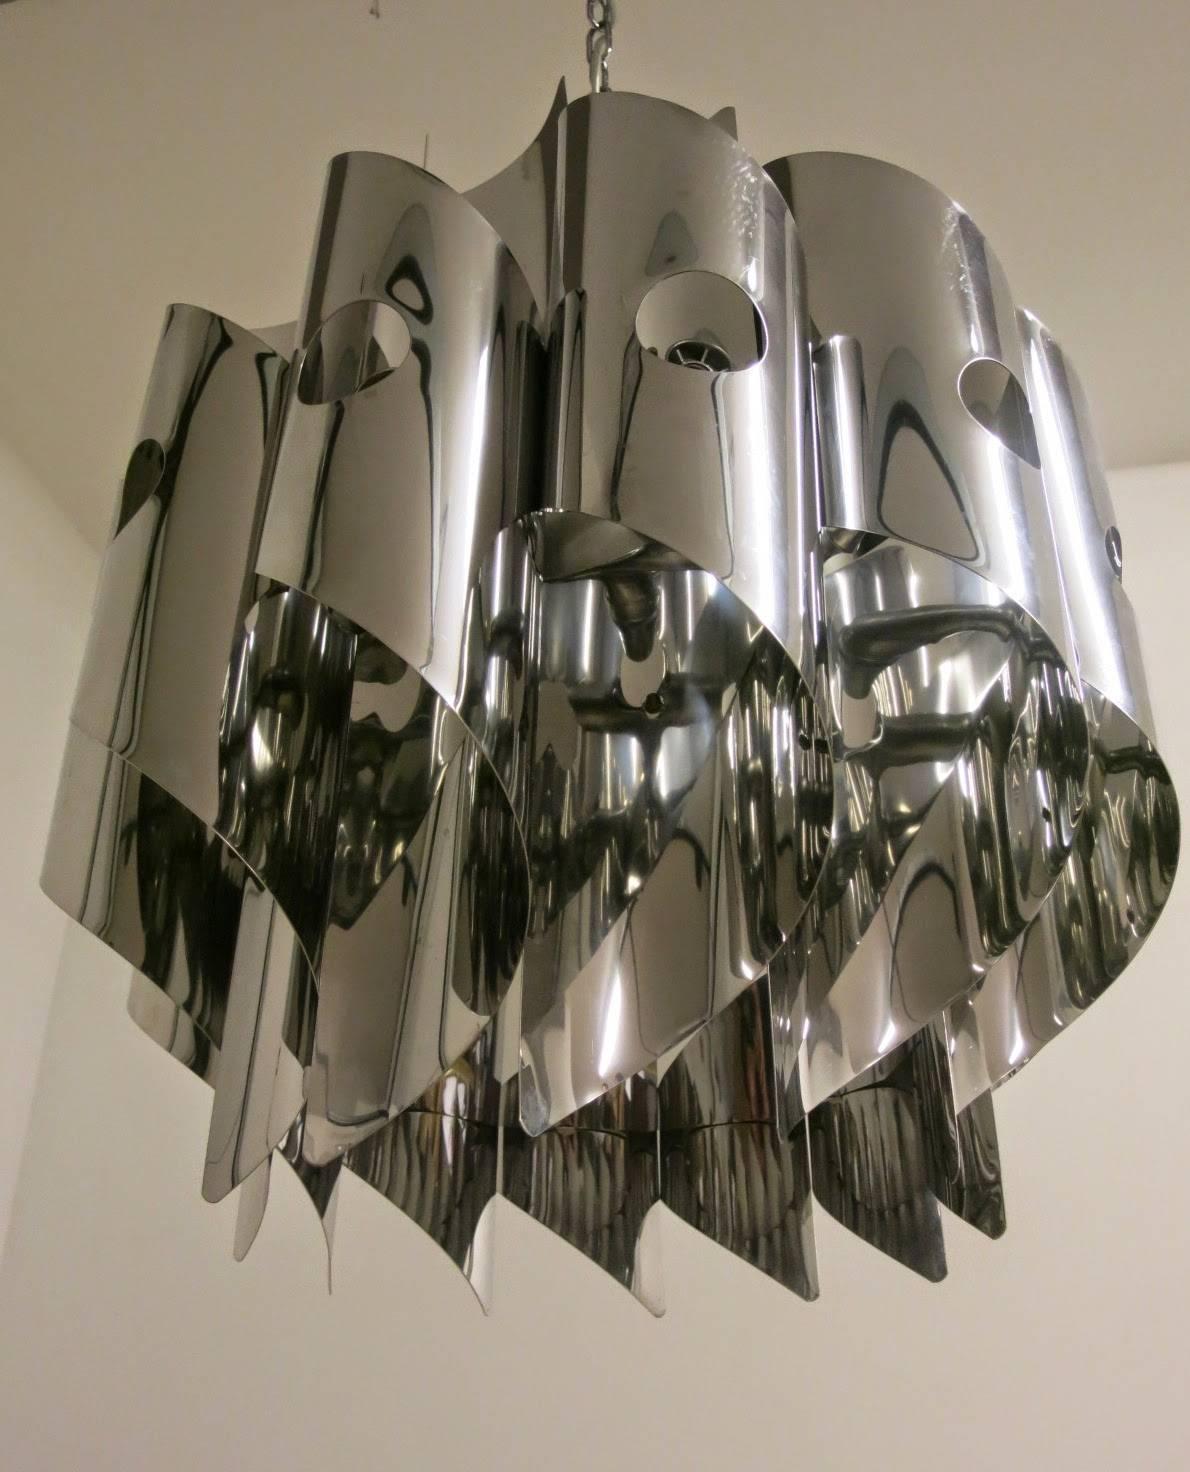 Vintage Italian pendant with 12 chrome spirals / Designed by Sciolari circa 1970’s / Made in Italy 
12 lights / E12 or E14 type / max 40W each
Diameter: 22 inches / Height: 22 inches plus chain and canopy
1 in stock in Palm Springs currently ON 50%